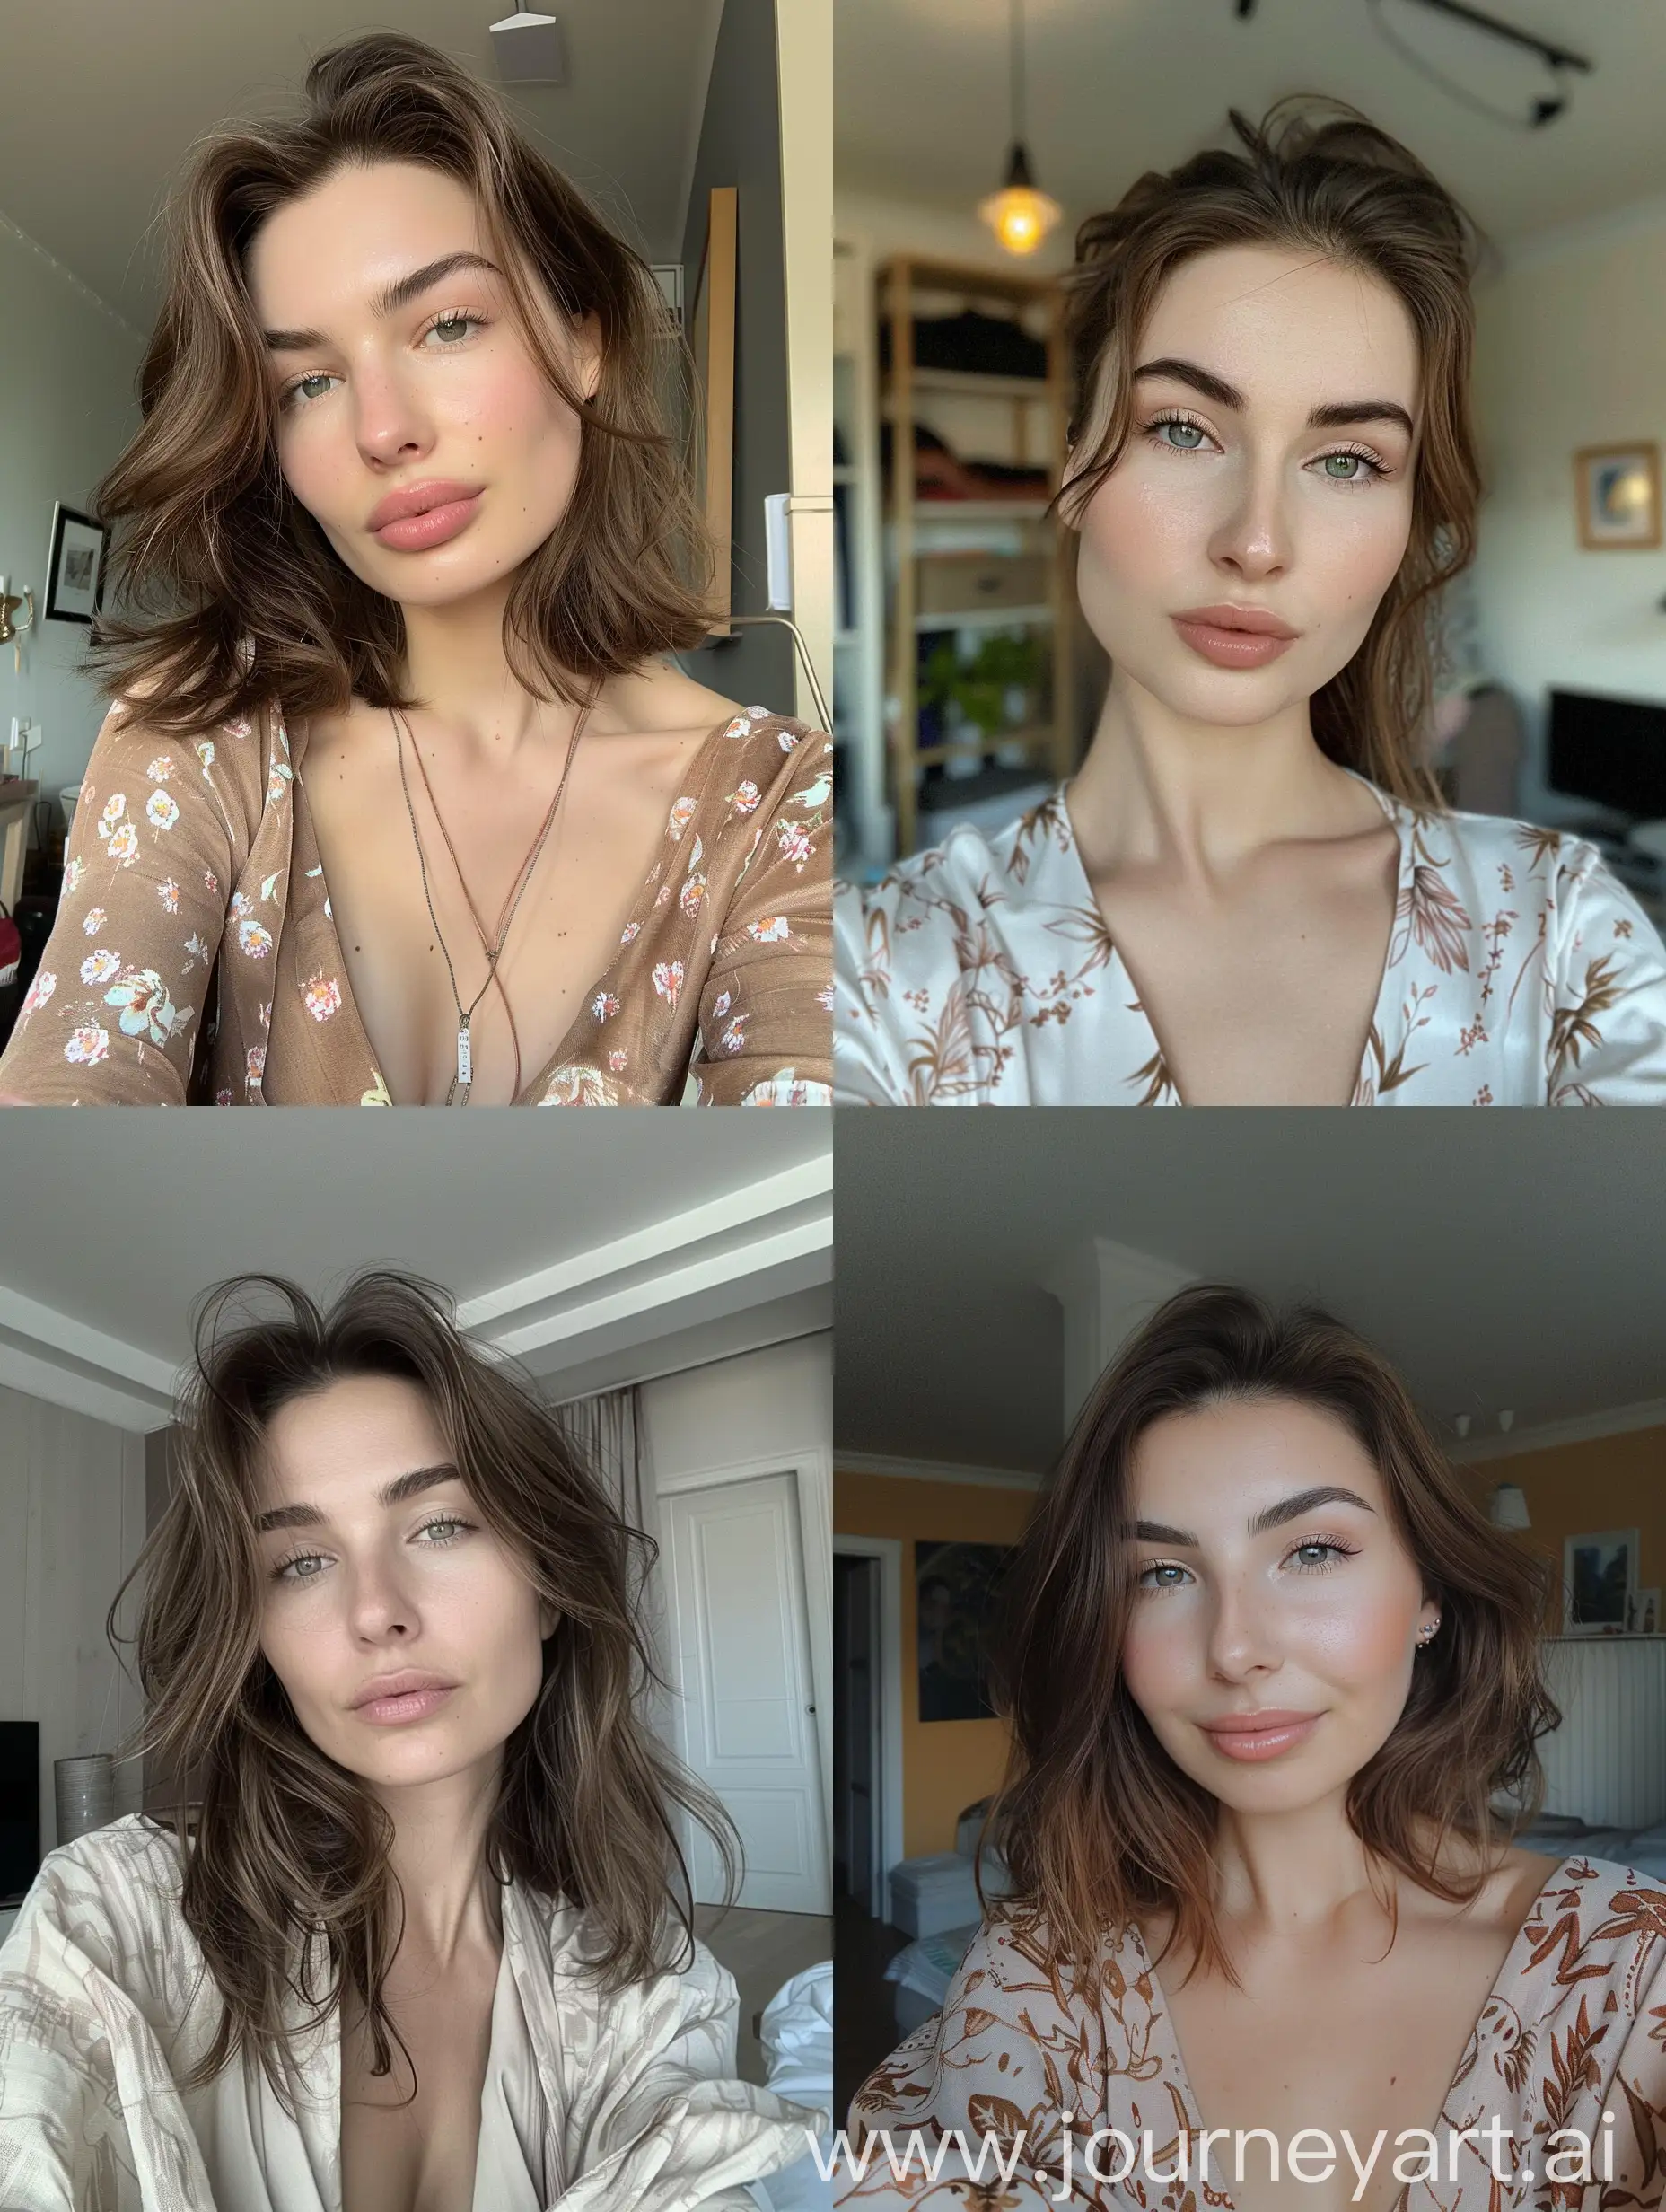 Interior selfie of a beautiful woman with beautiful Slavic features, clear view of her face, home interior background, wearing different clothes, shot on a low camera quality phone, suitable for account verification purposes,